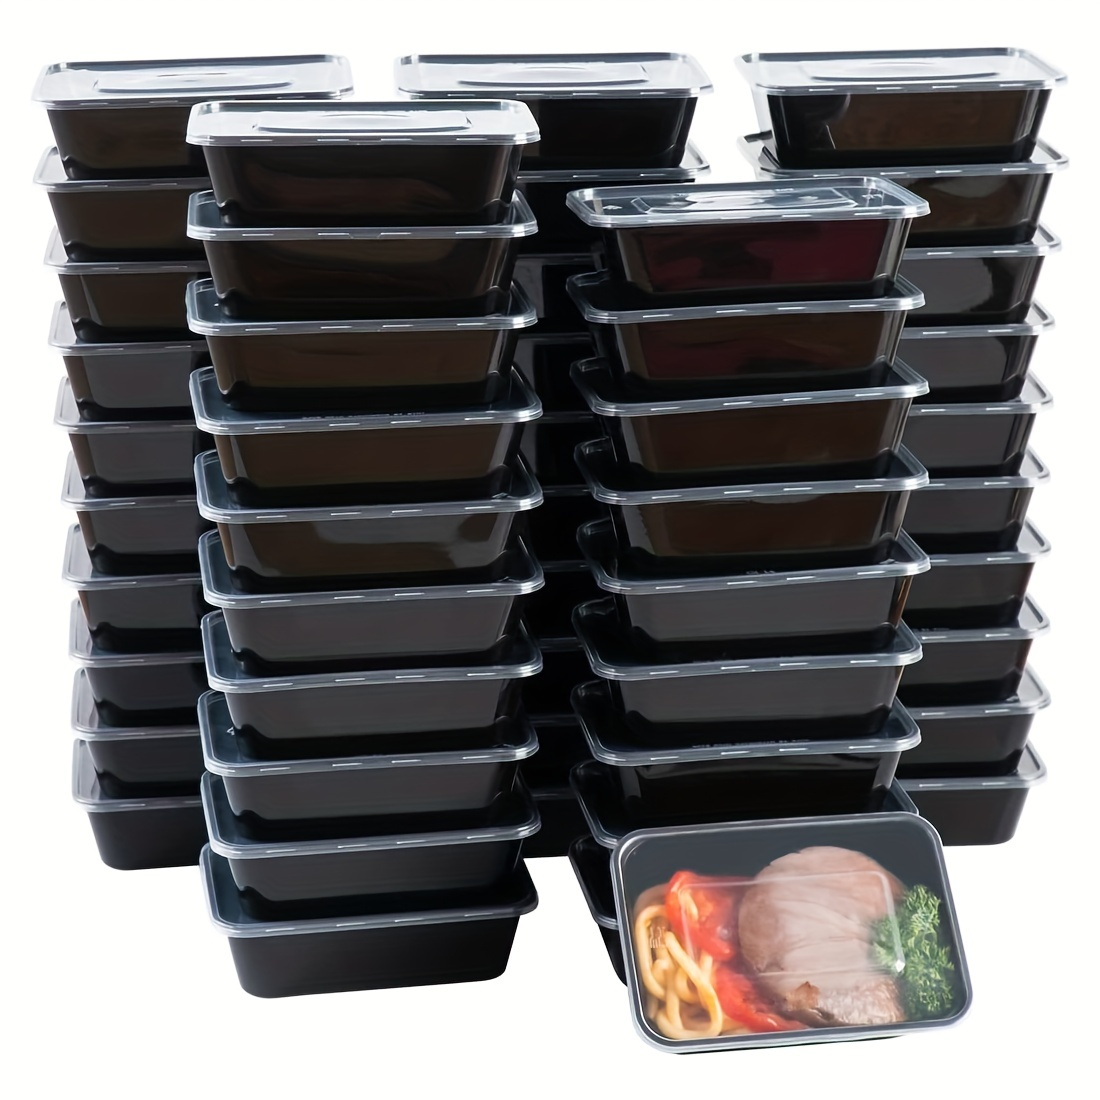 IUMÉ 50-Pack Meal Prep Containers, 26 OZ Microwavable Reusable Food  Containers with Lids for Food Prepping, Disposable Lunch Boxes, BPA Free  Plastic Food Boxes- Stackable, Freezer Dishwasher Healthy